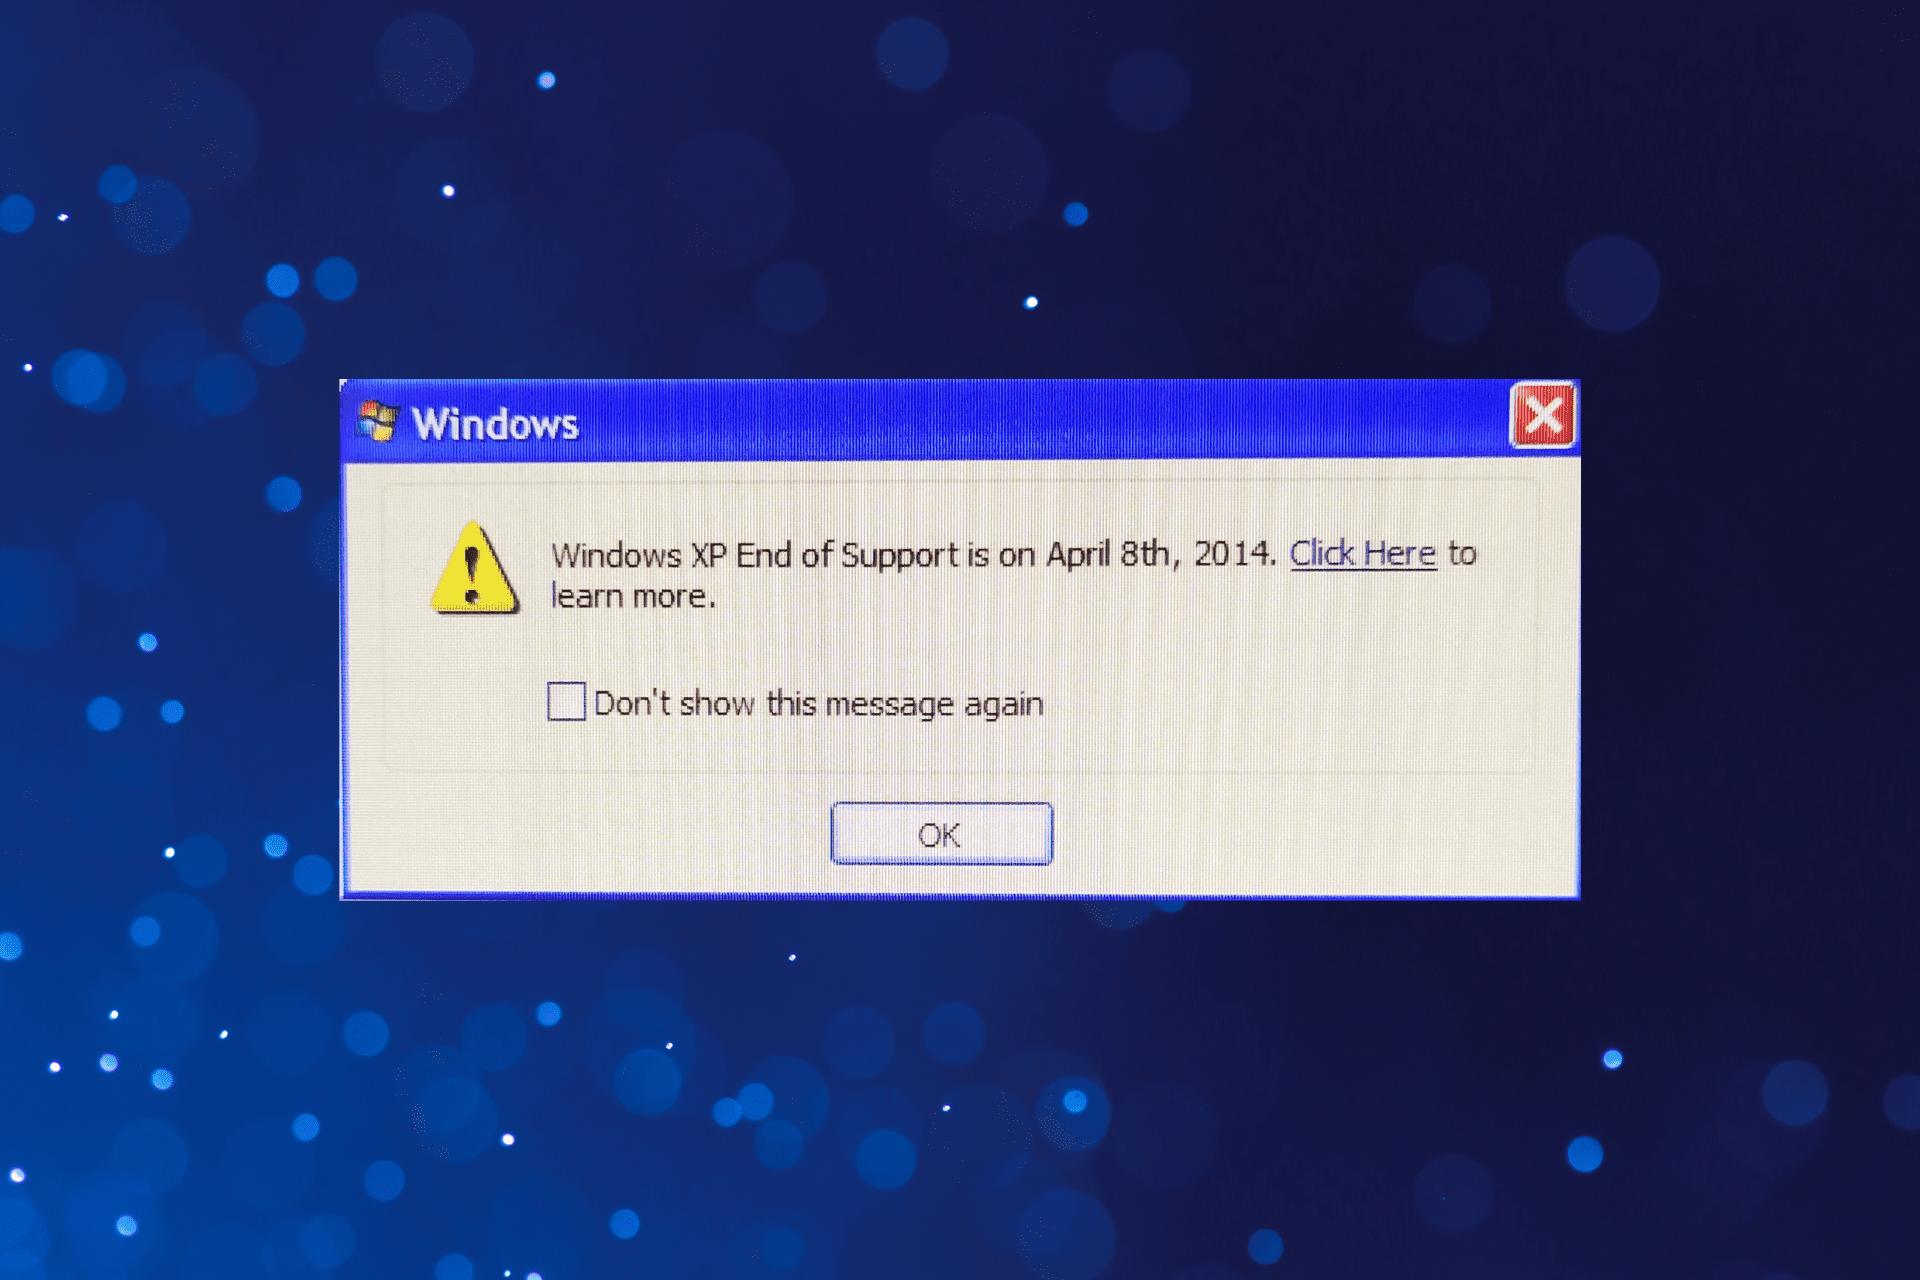 Microsoft still sends alerts about Windows XP’s End of Support, but does it help anyone